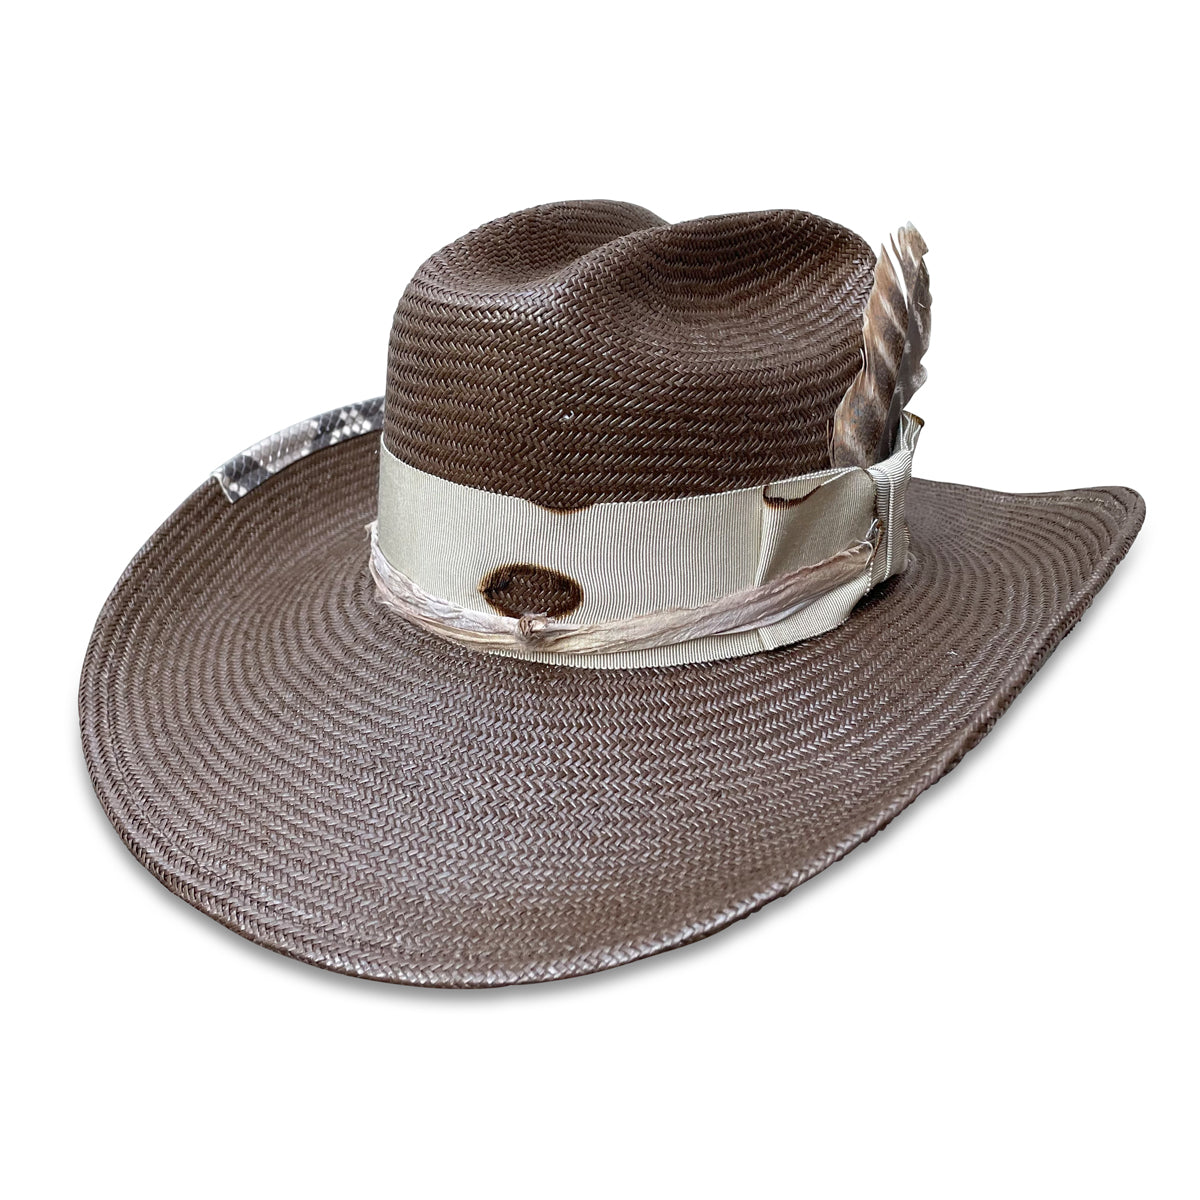 Artisanal brown straw cowboy hat with elegant ribbon layers, a snakeskin touch, and a feather, by Cha Cha's  House of Ill Repute in New York